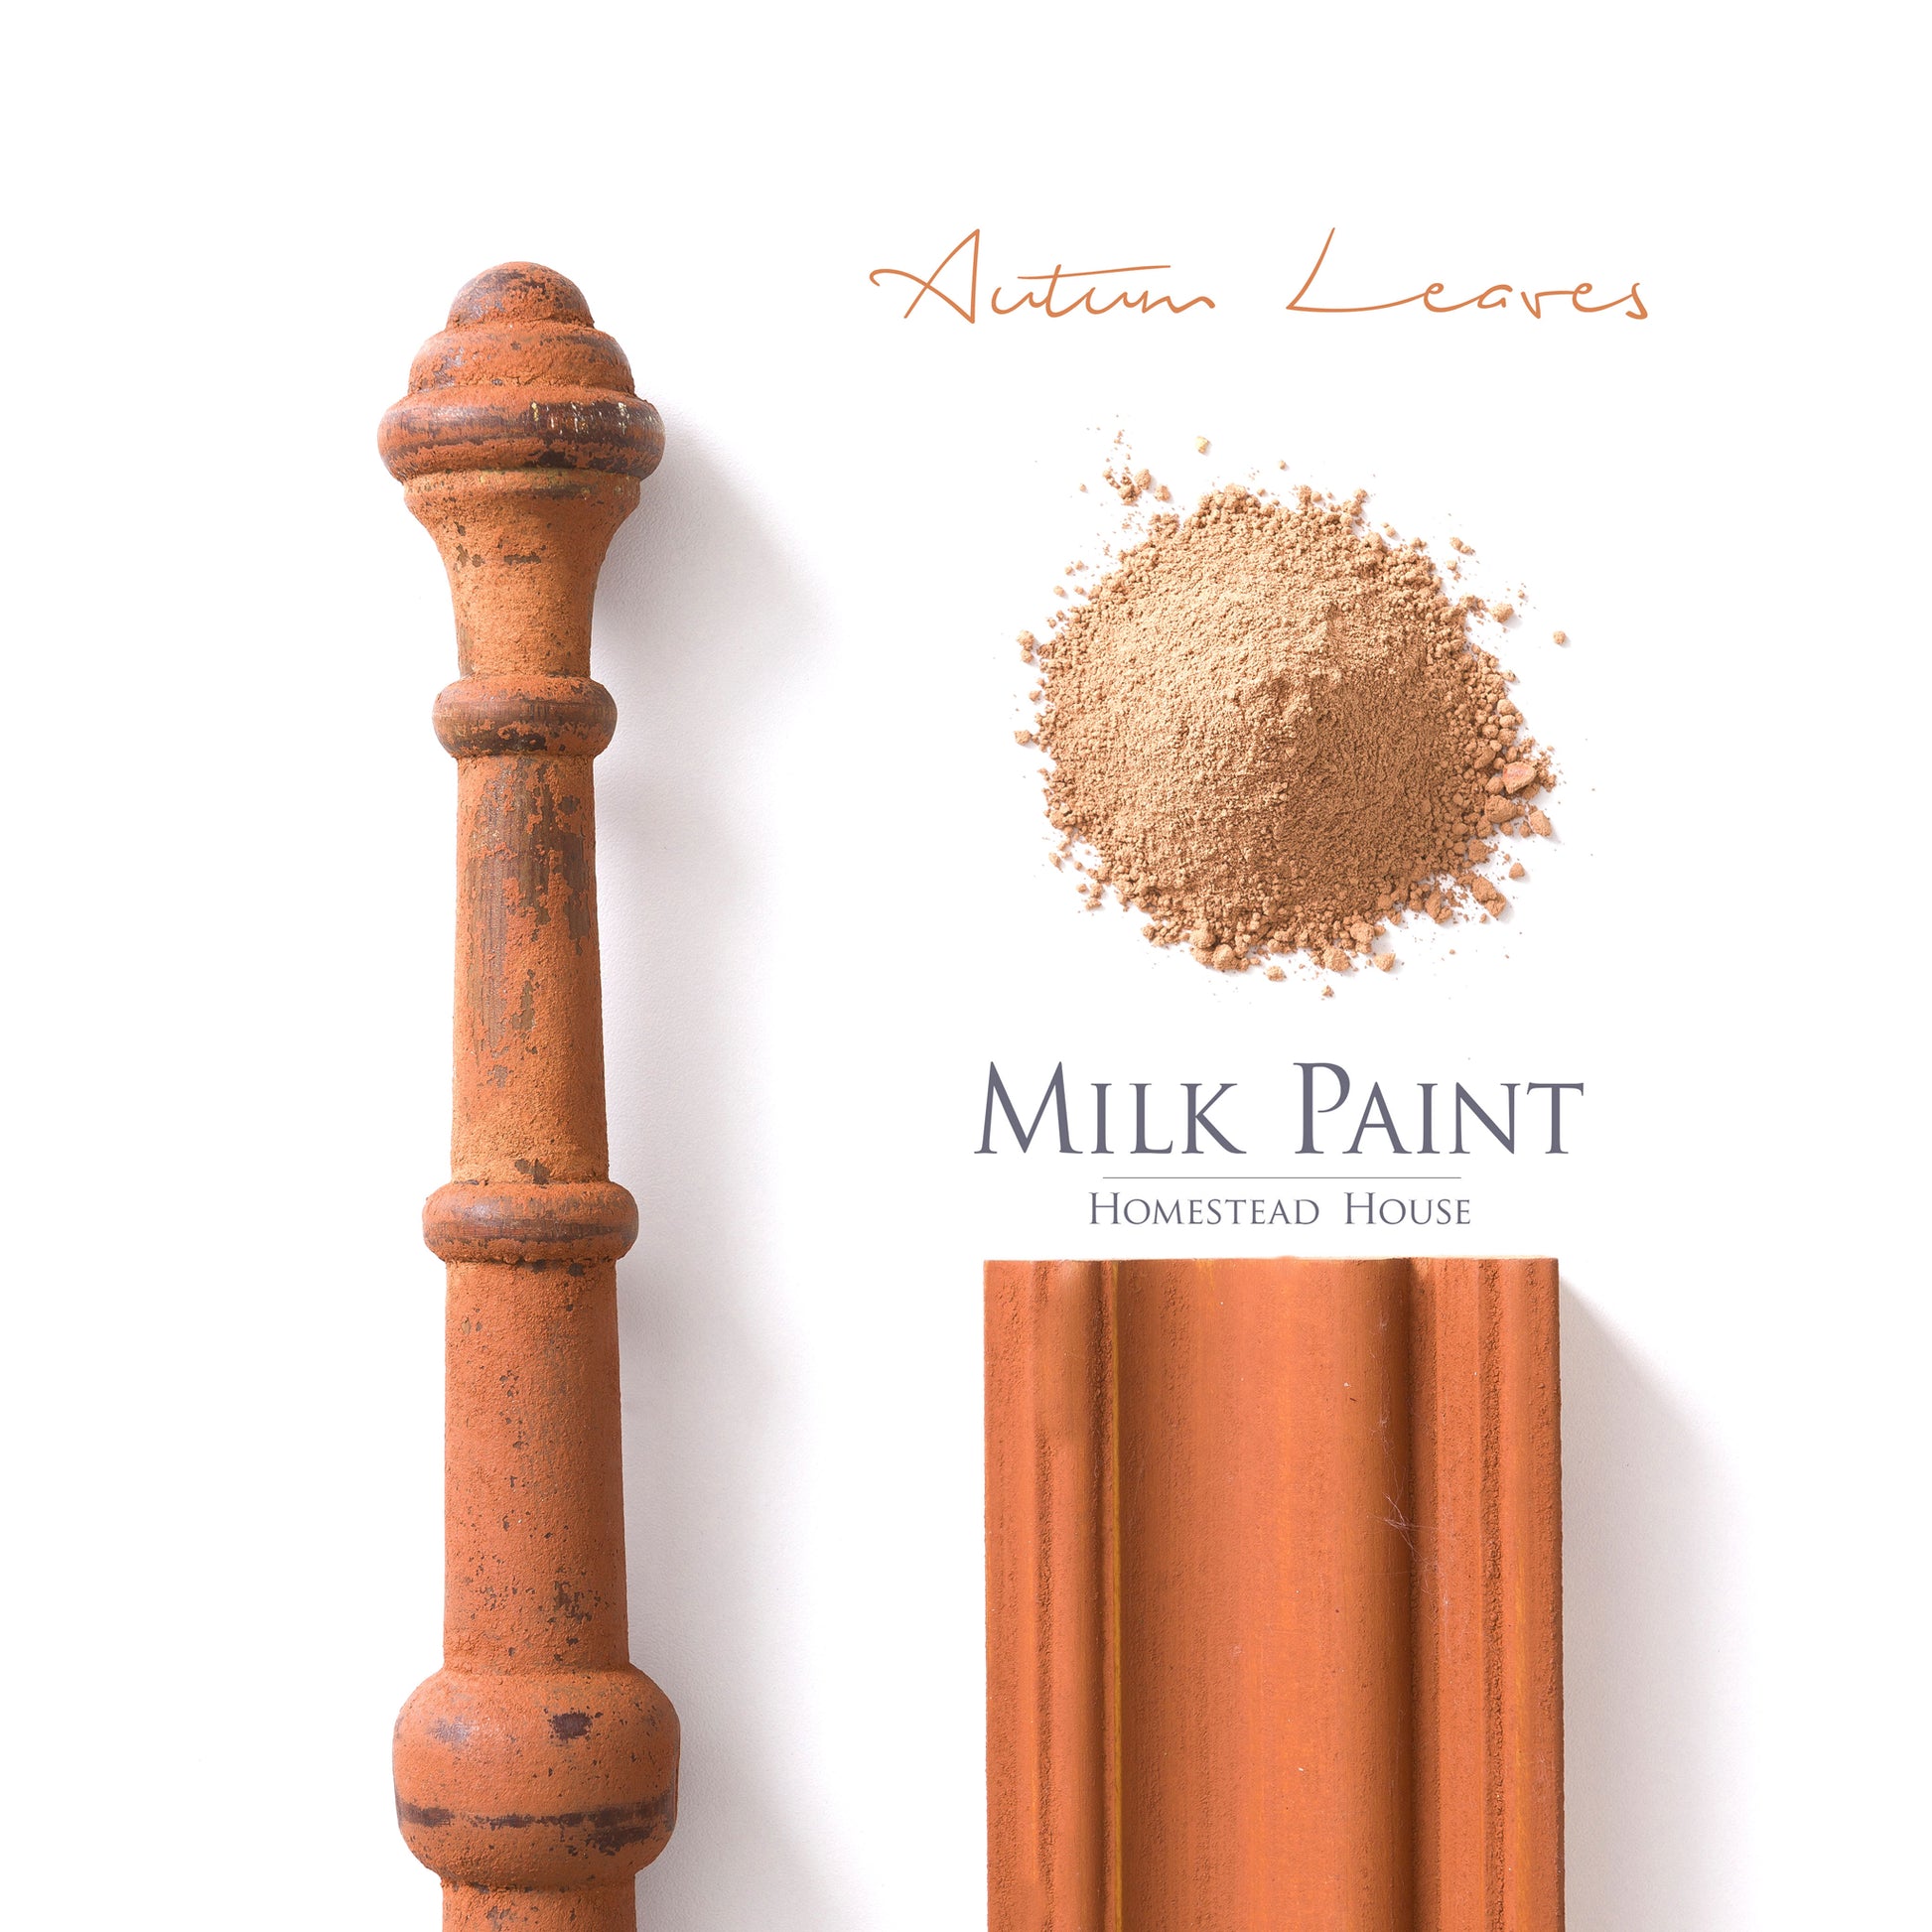 Milk Paint from Homestead House in Autumn Leaves, A deep rustic orange with a hint of rust. | homesteadhouse.ca